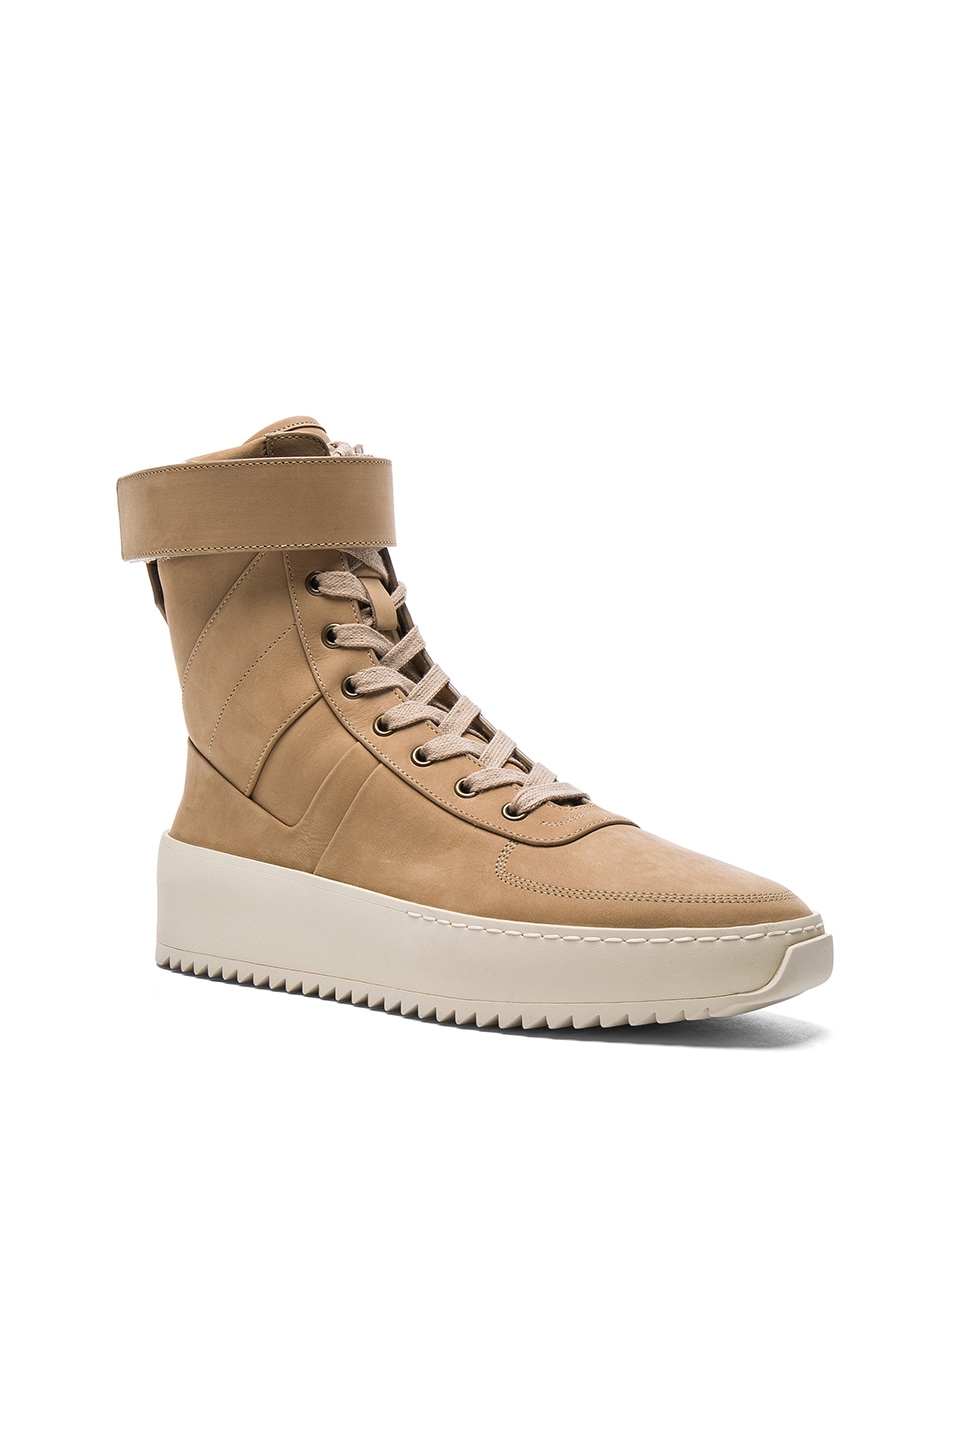 Image 1 of Fear of God Nubuck Leather Military Sneakers in Canapa